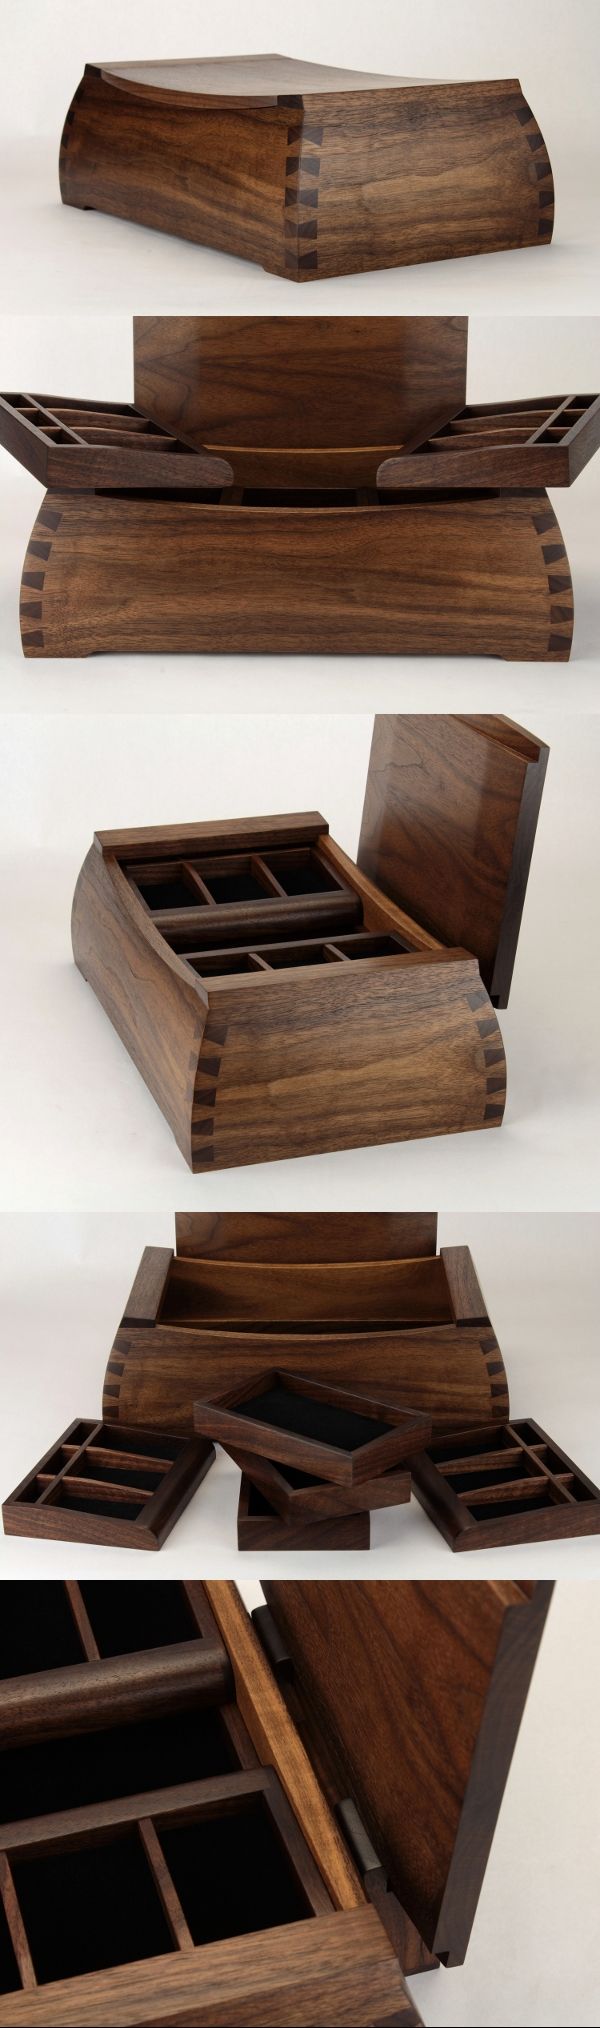 5th wedding anniversary box. 5 dovetails on each corner and 5 removable trays. H...